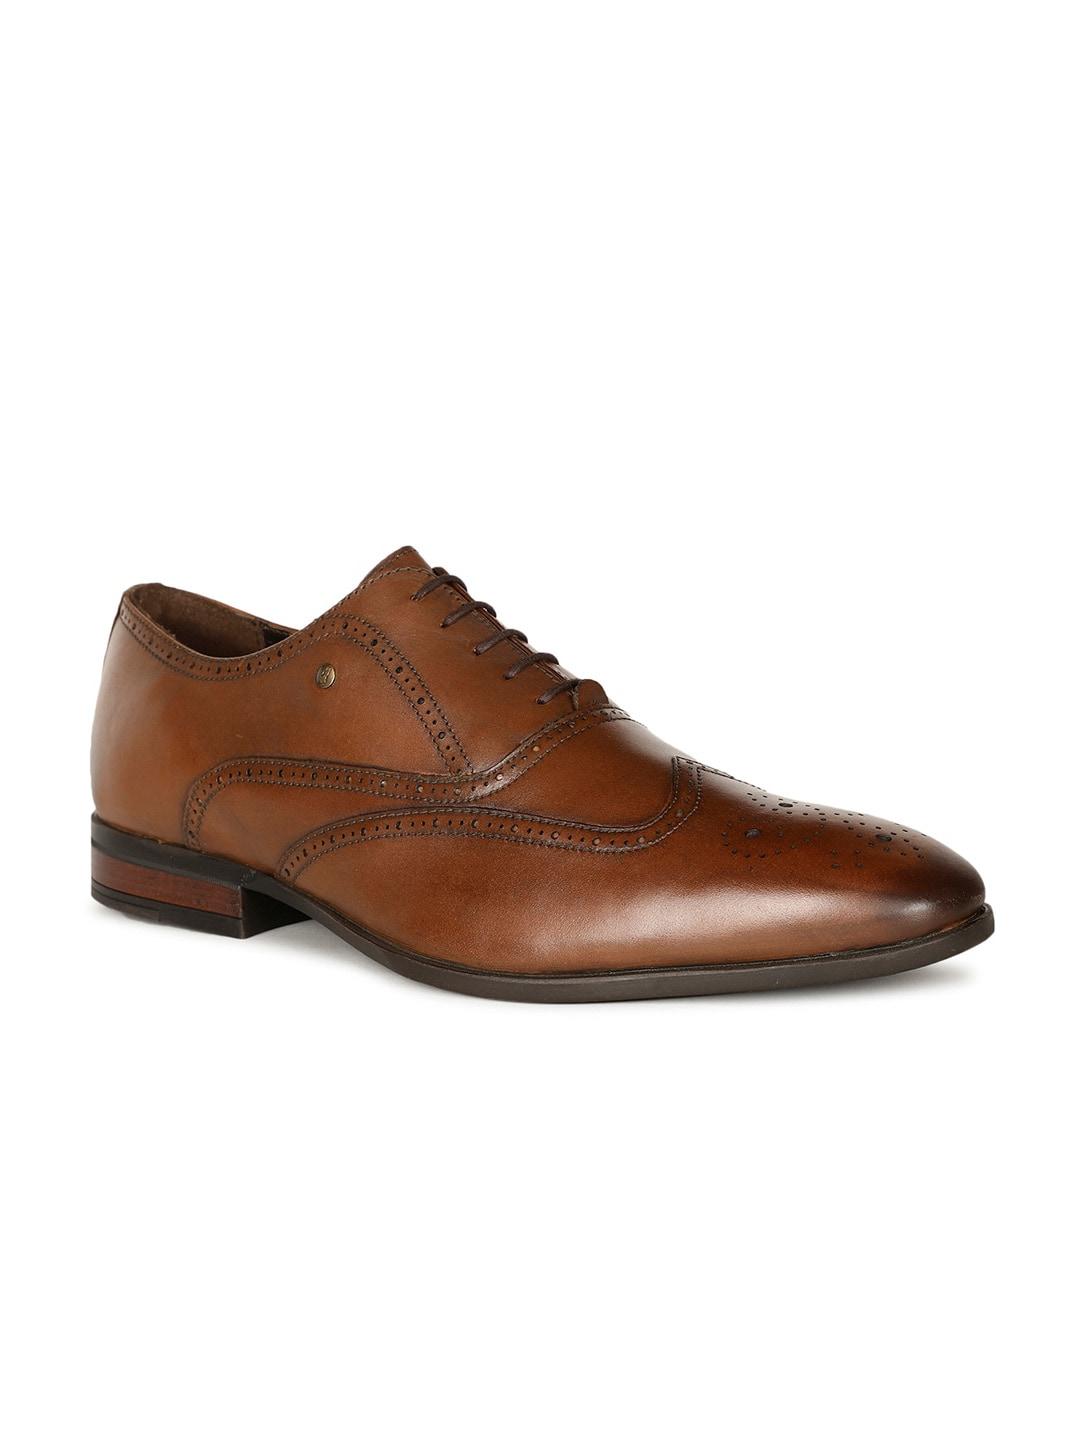 hush-puppies-men-perforated-leather-formal-brogues